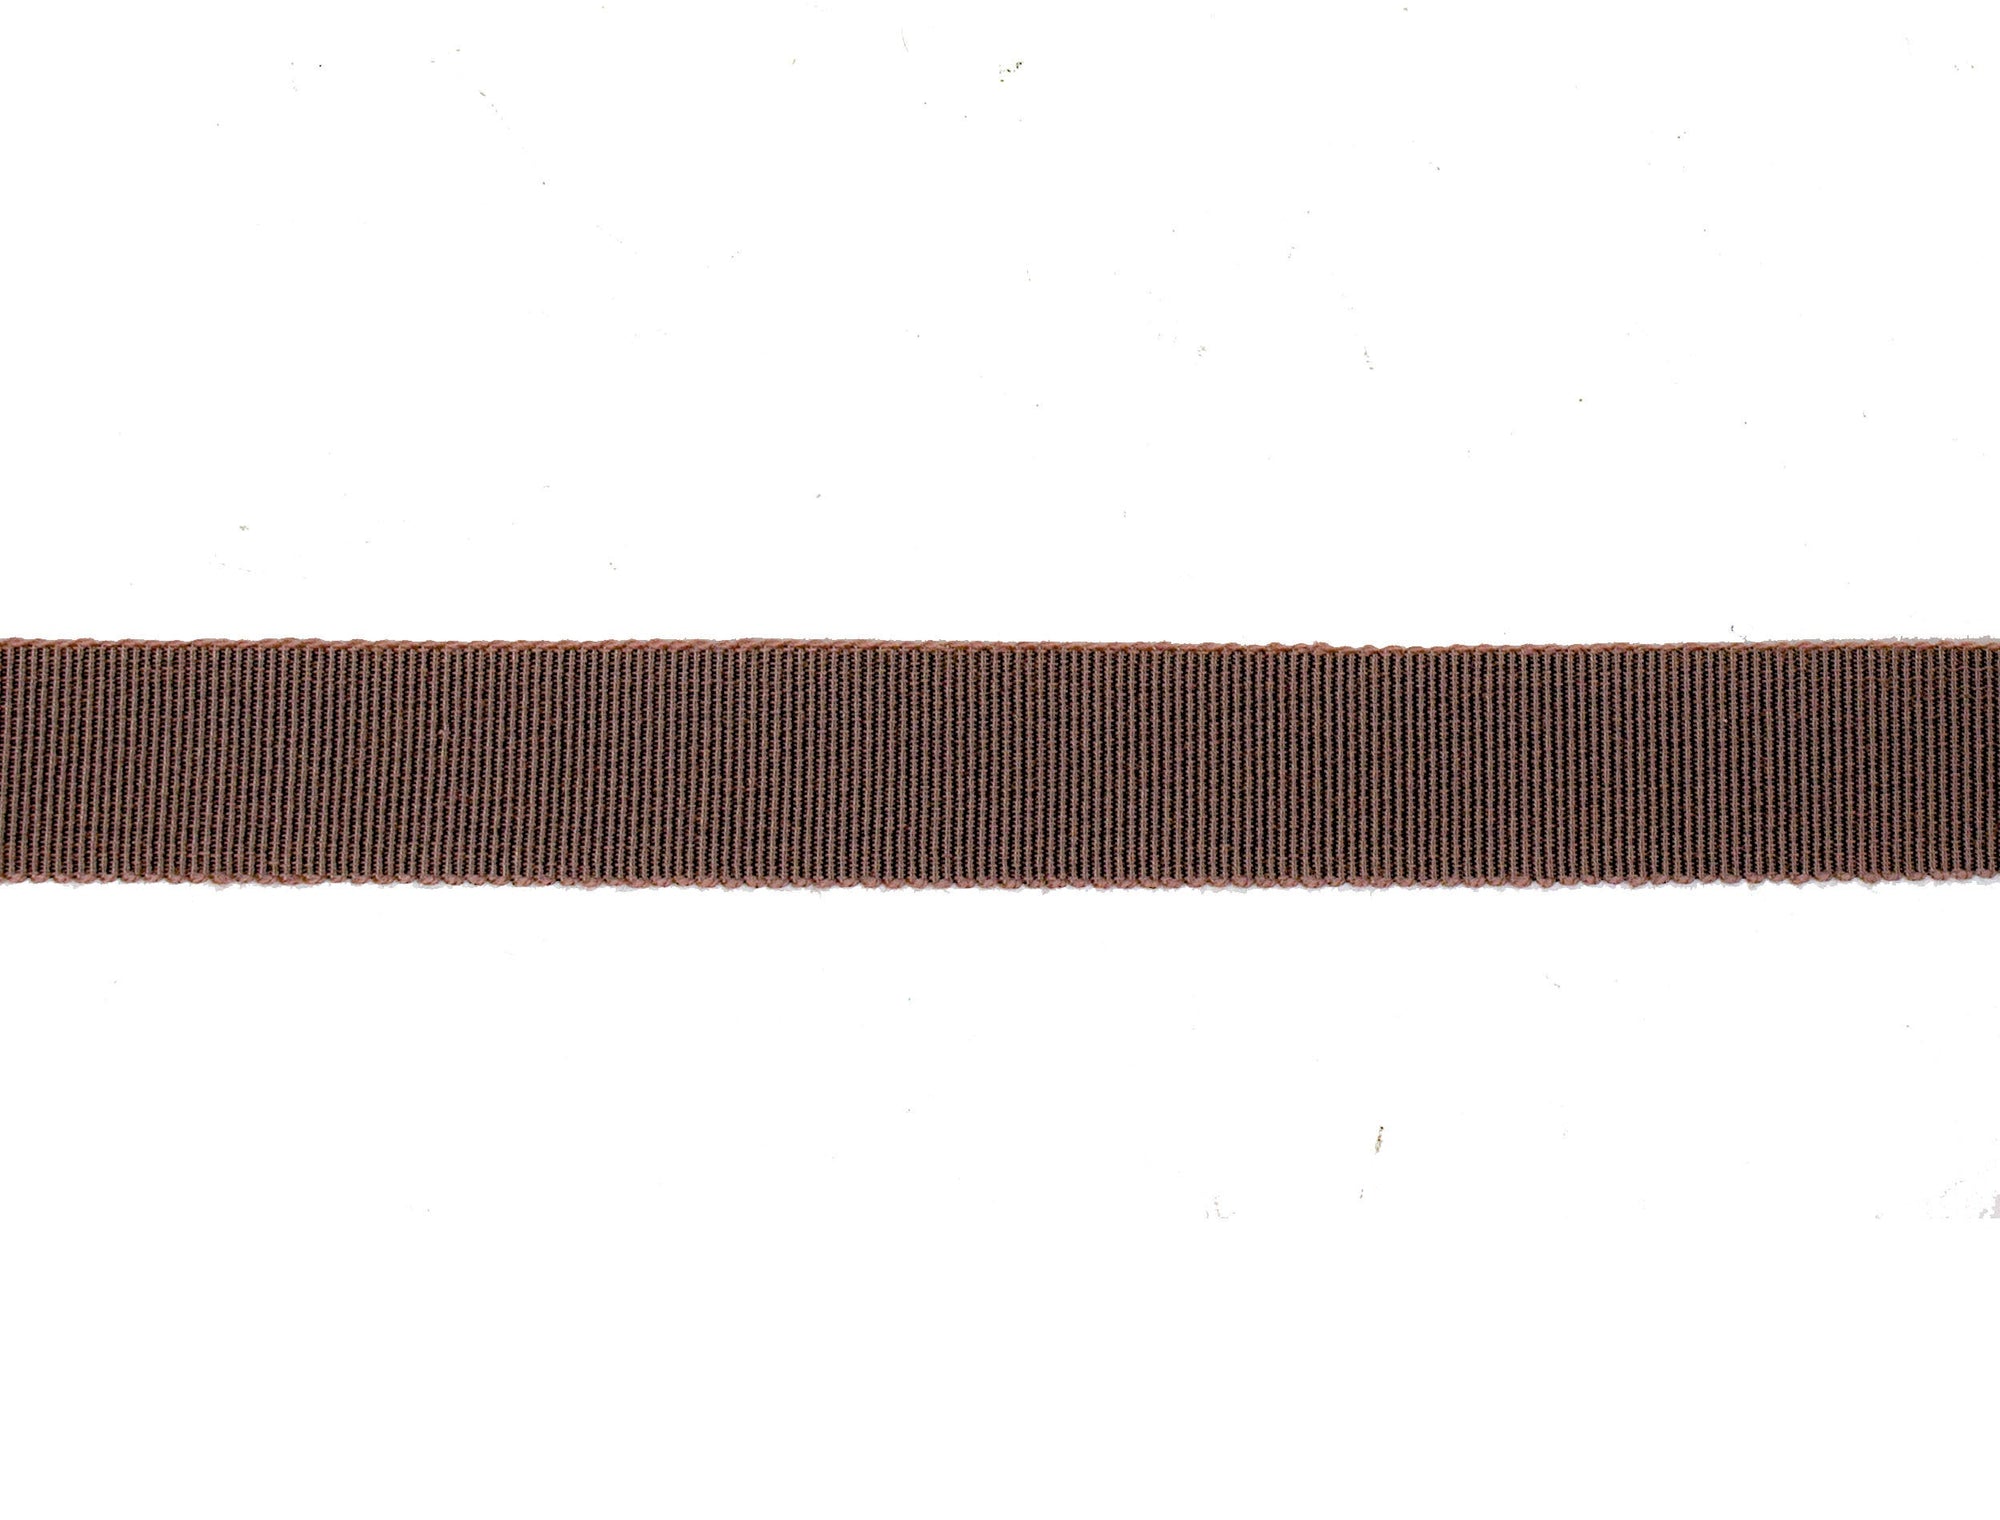 Vintage Ribbon Petersham 50/50 Cotton Rayon 23 mm Wide - Brown - Sold by the Yard - Humboldt Haberdashery